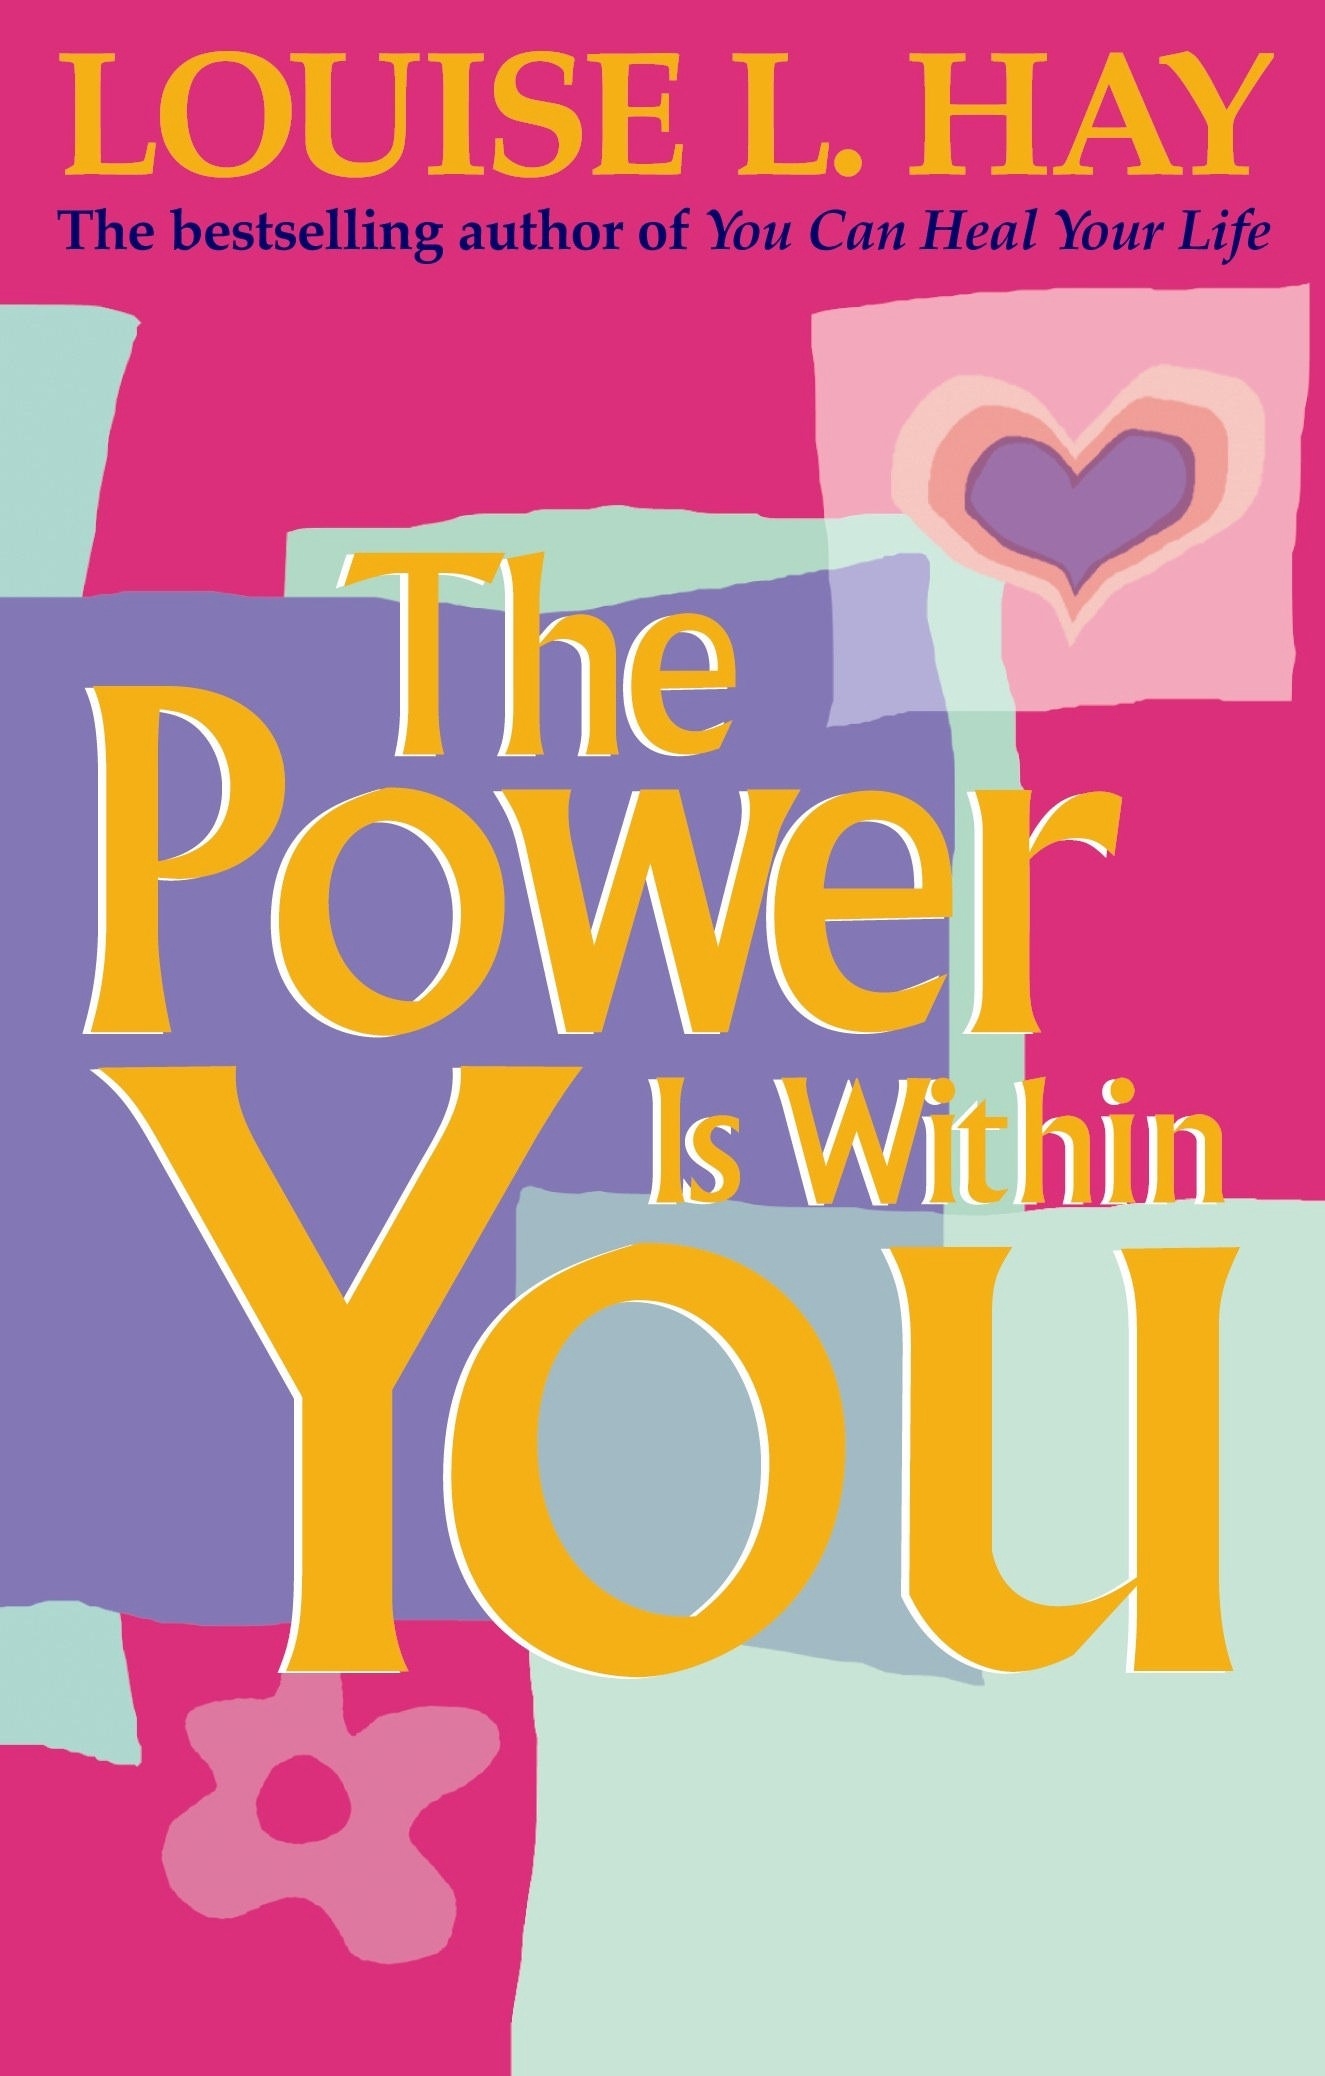 The Power Is Within You by Louise Hay